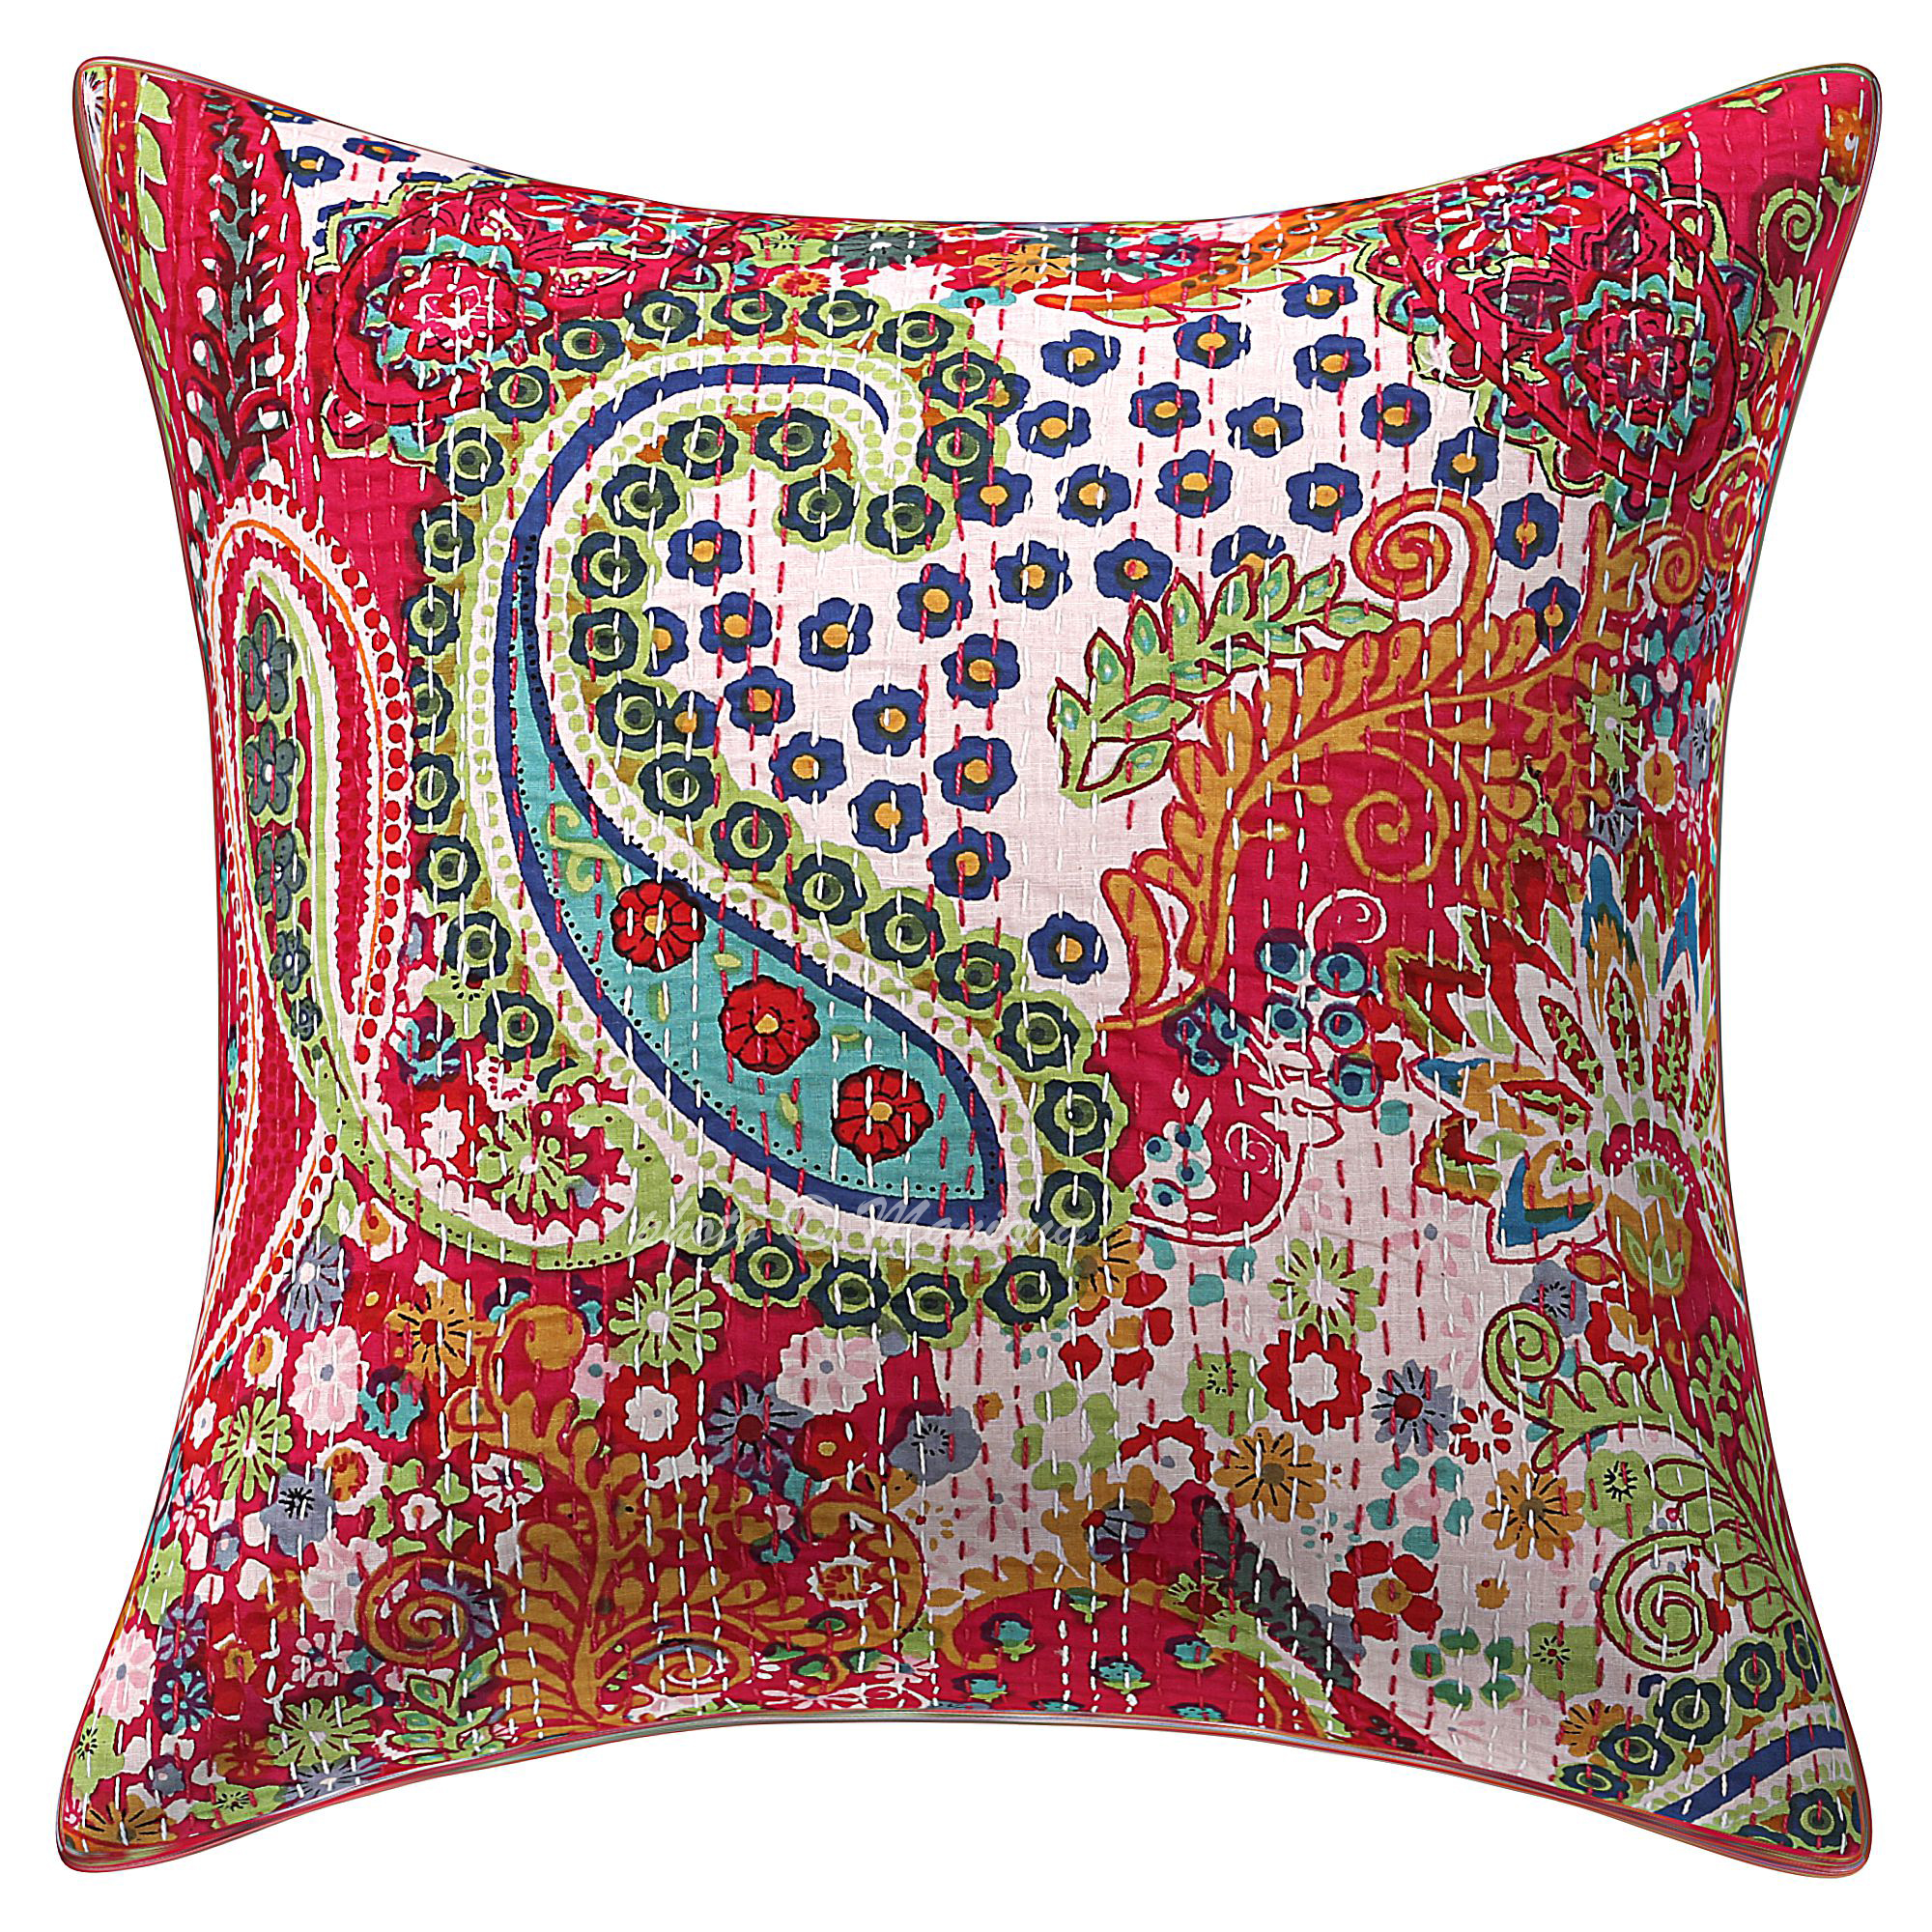 Set of 2 - Red Paisley Print Kantha Cushion Cover | Vintage Kantha Quilt